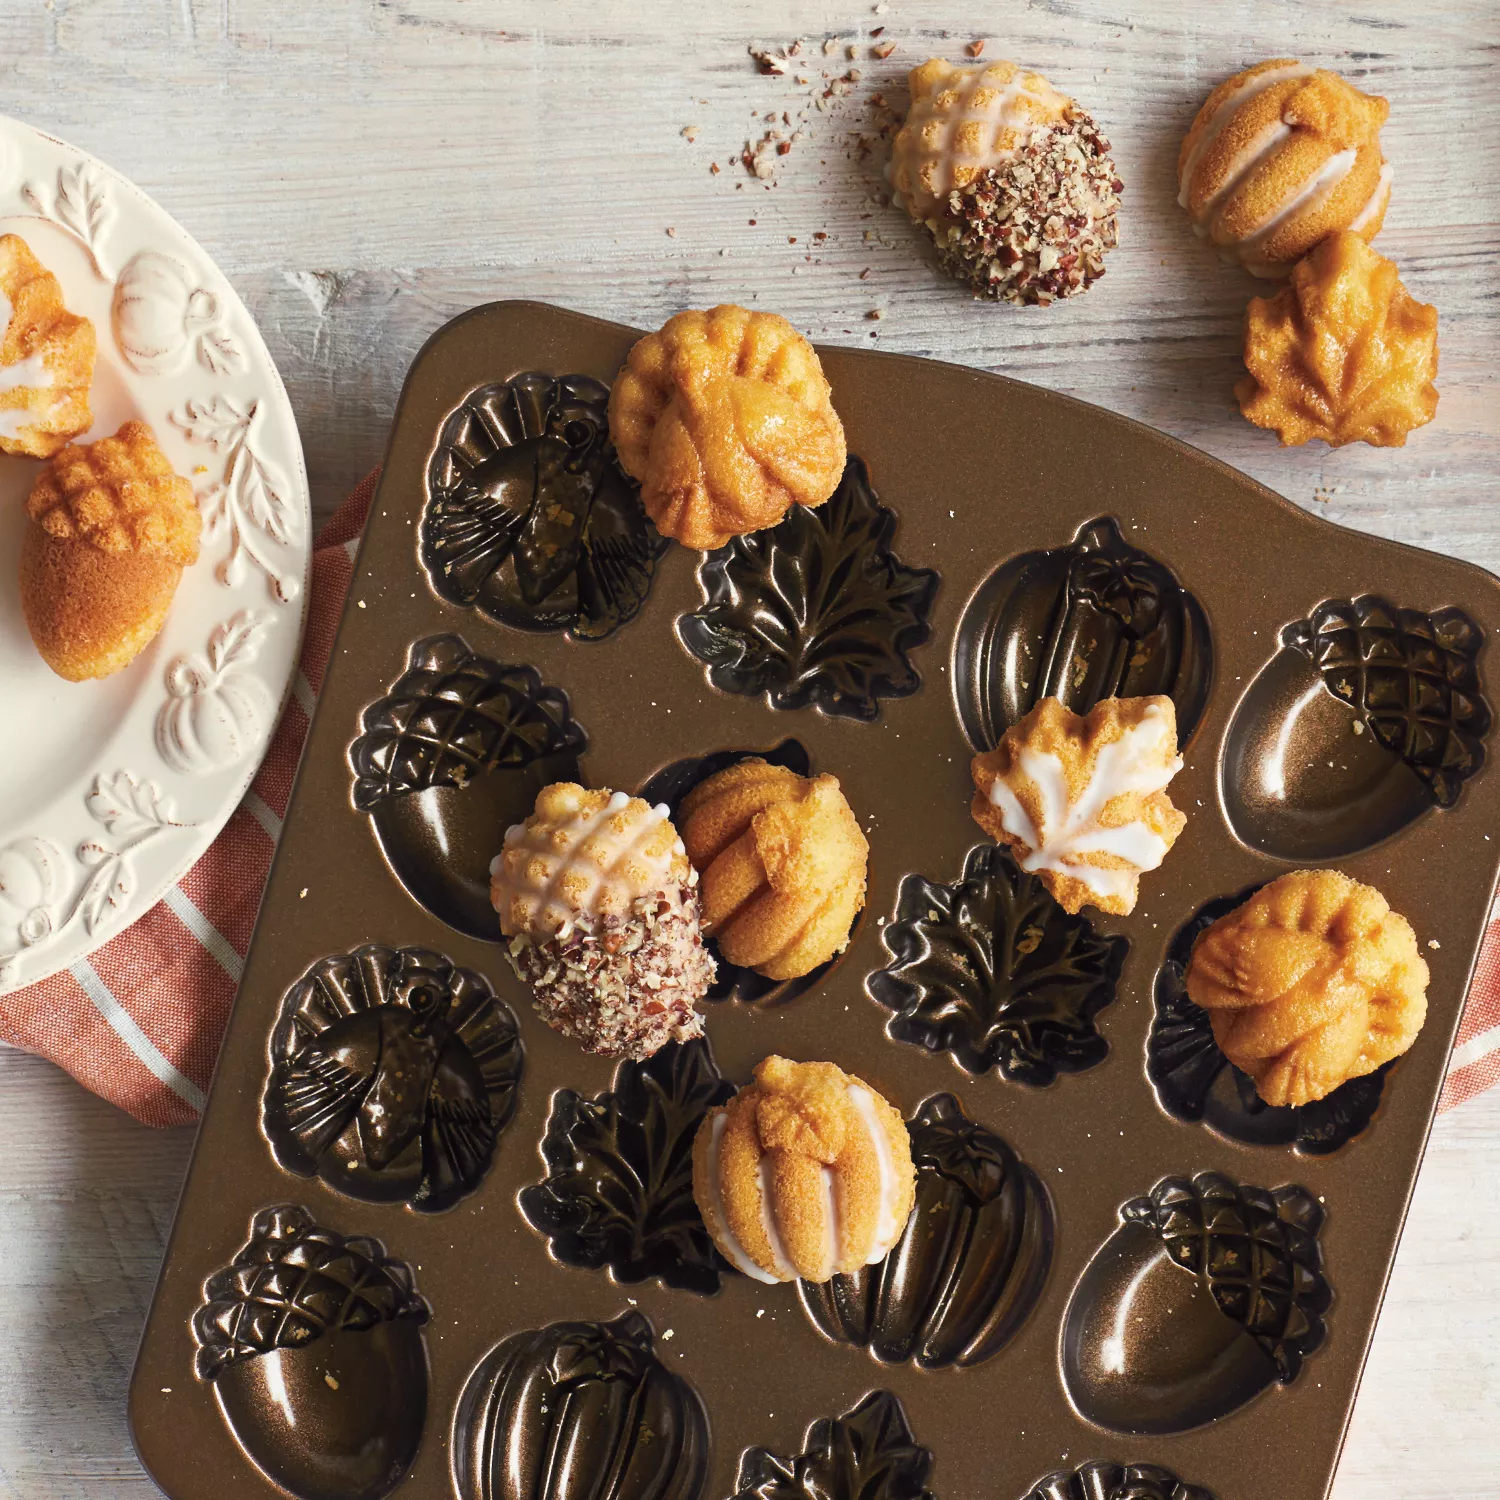 Sur La Table - Add a touch of whimsy to your fall bakes! 🍁🎃🌰 The Nordic  Ware Autumn Delights Cakelet Pan bakes charming pumpkins, acorns and leaves  right into your creations. And